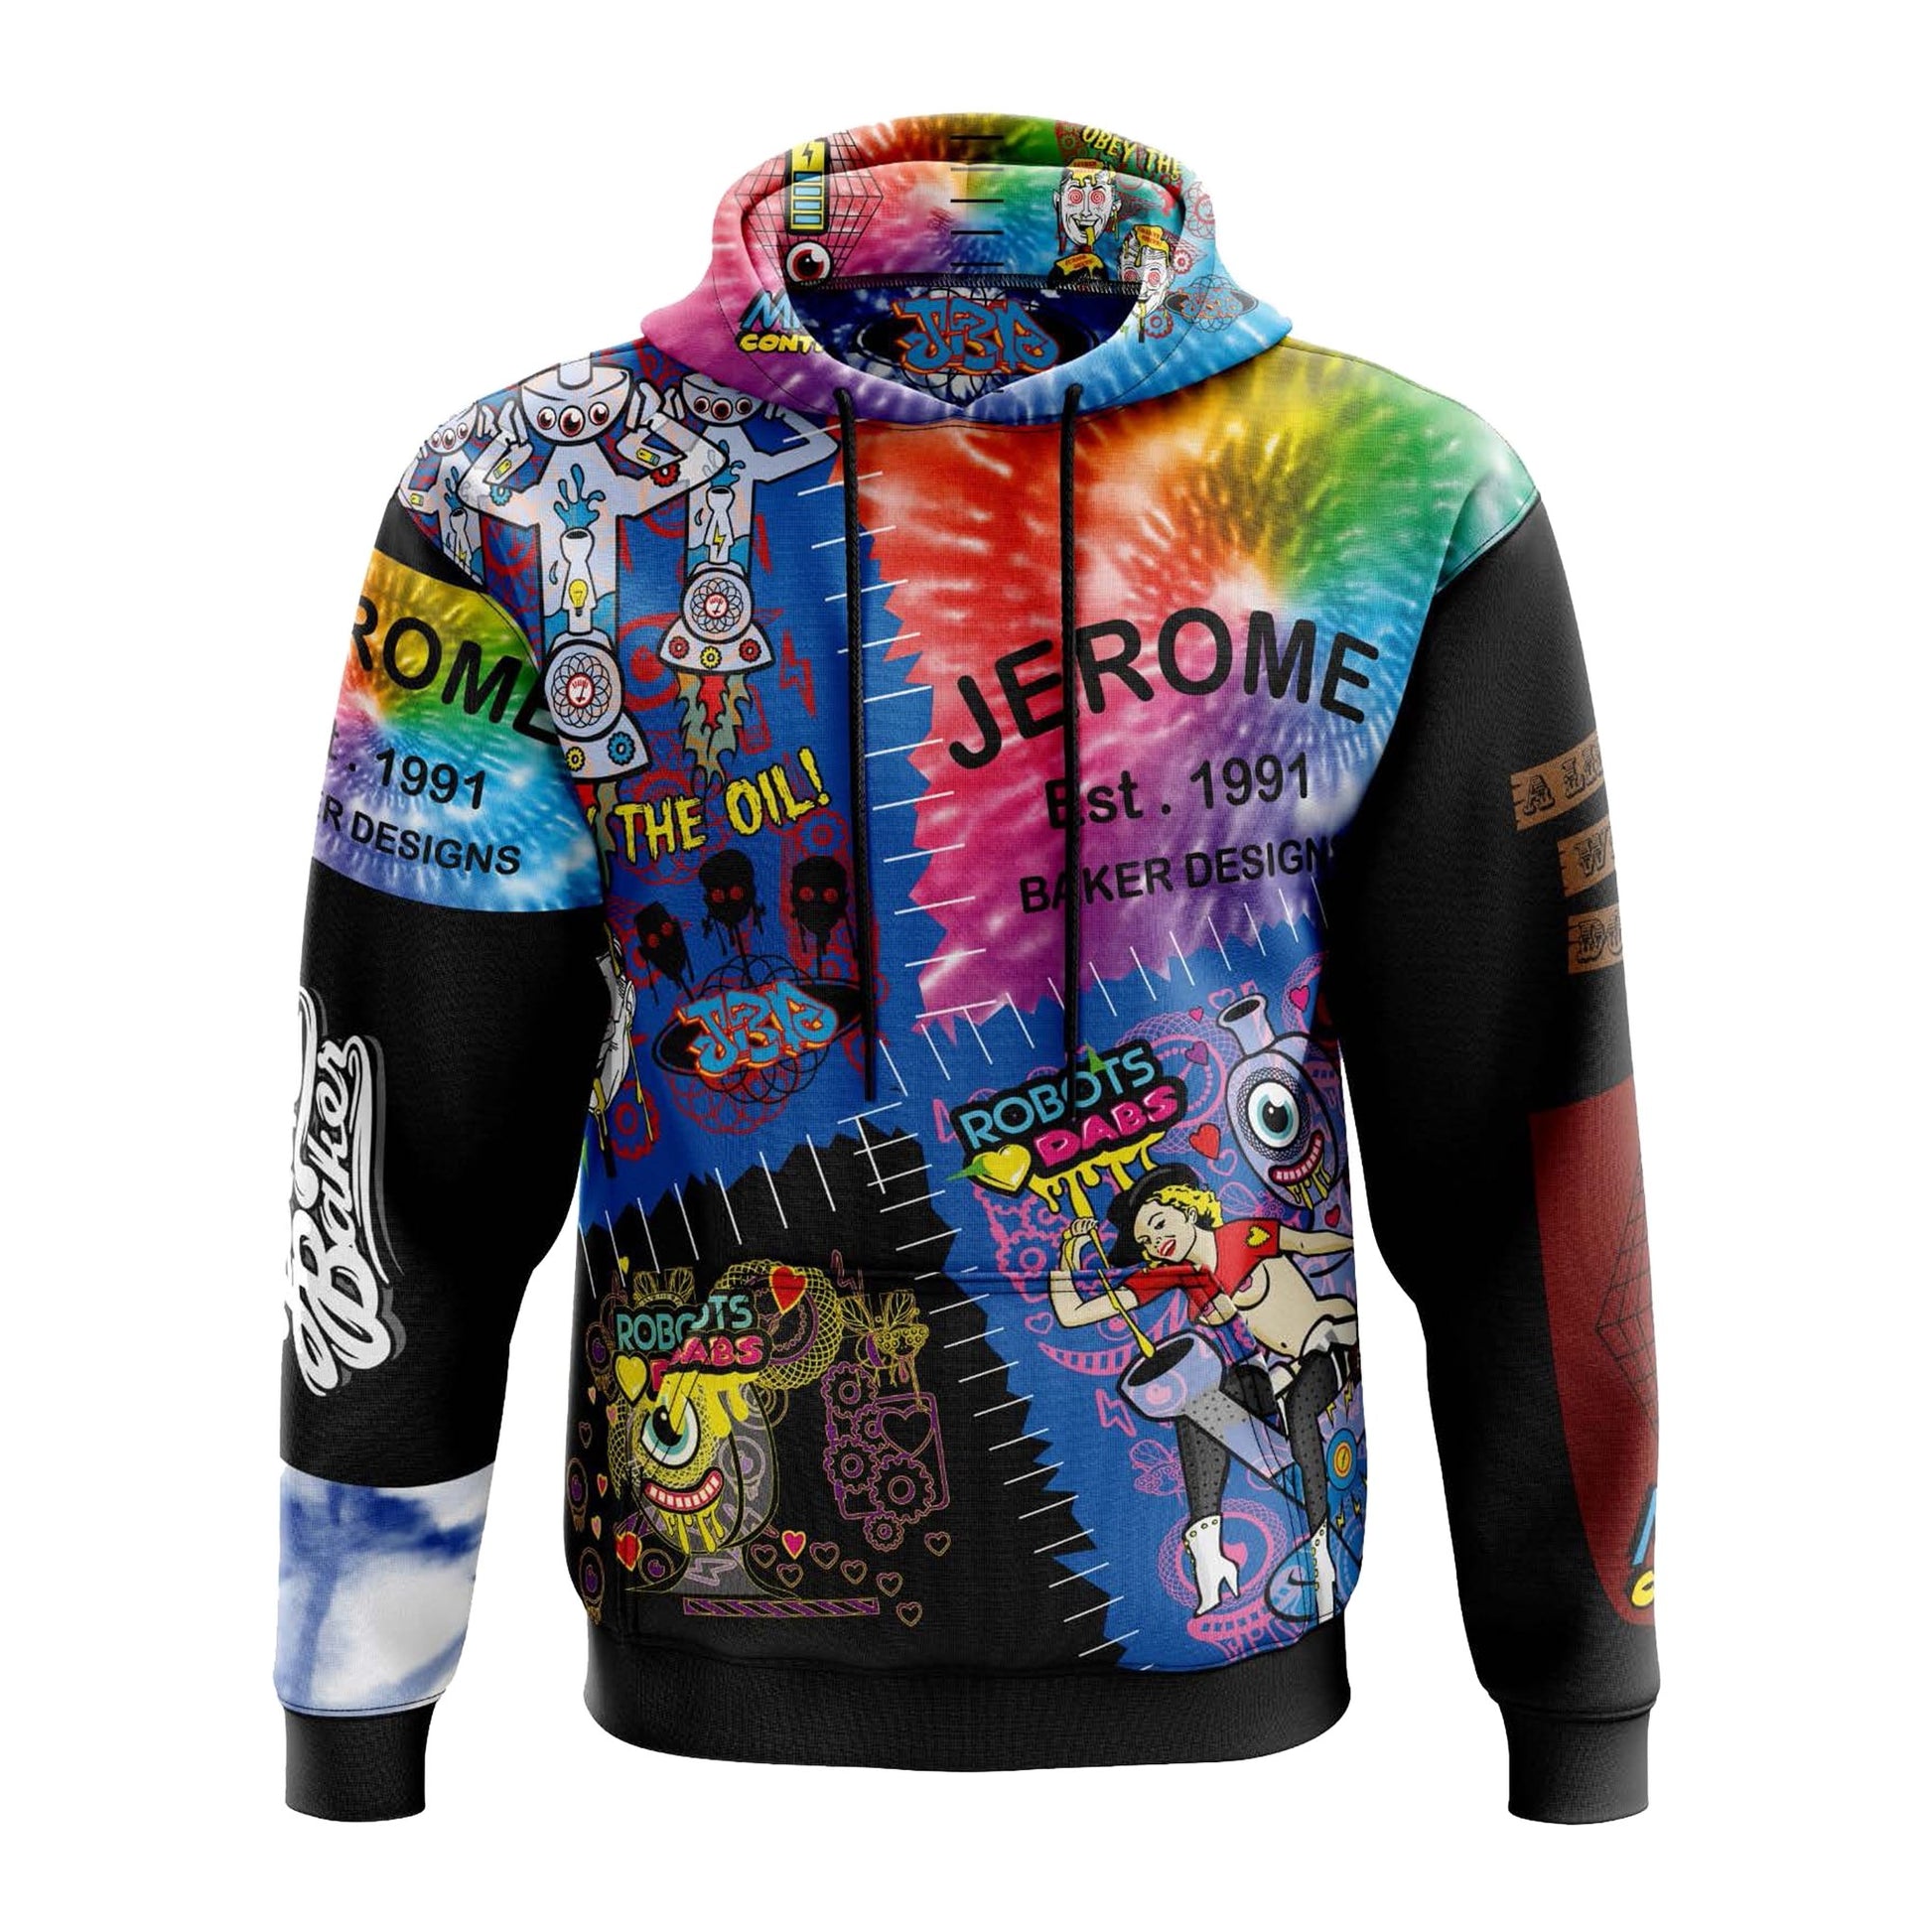 Jerome Baker Designs Dye Sublimation Hoodie * SOLD OUT * – Kulture Klothing  Club